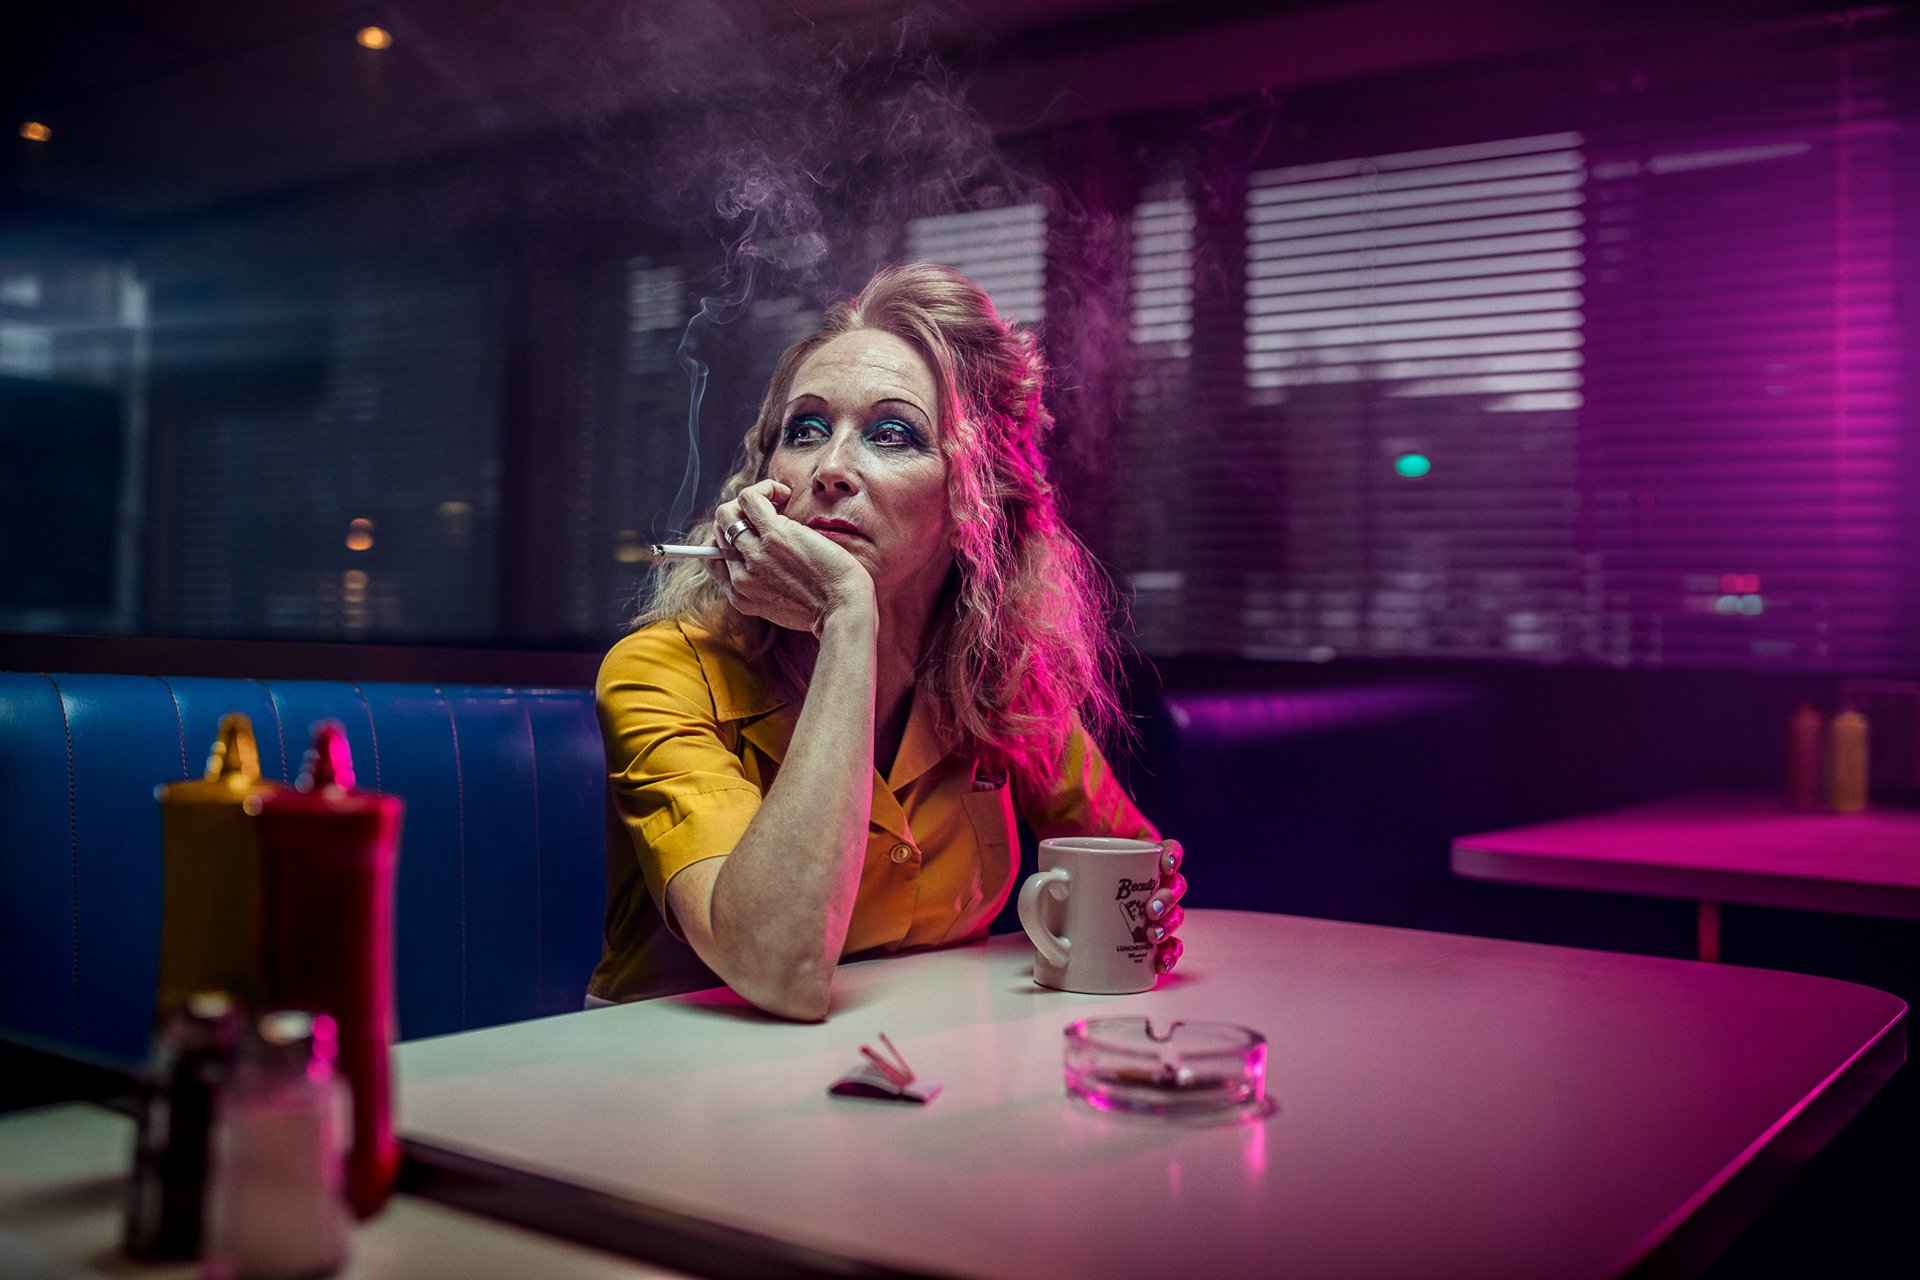 Felix Renaud Uses Cinematic Colors to Tell a Smoking Photo Story